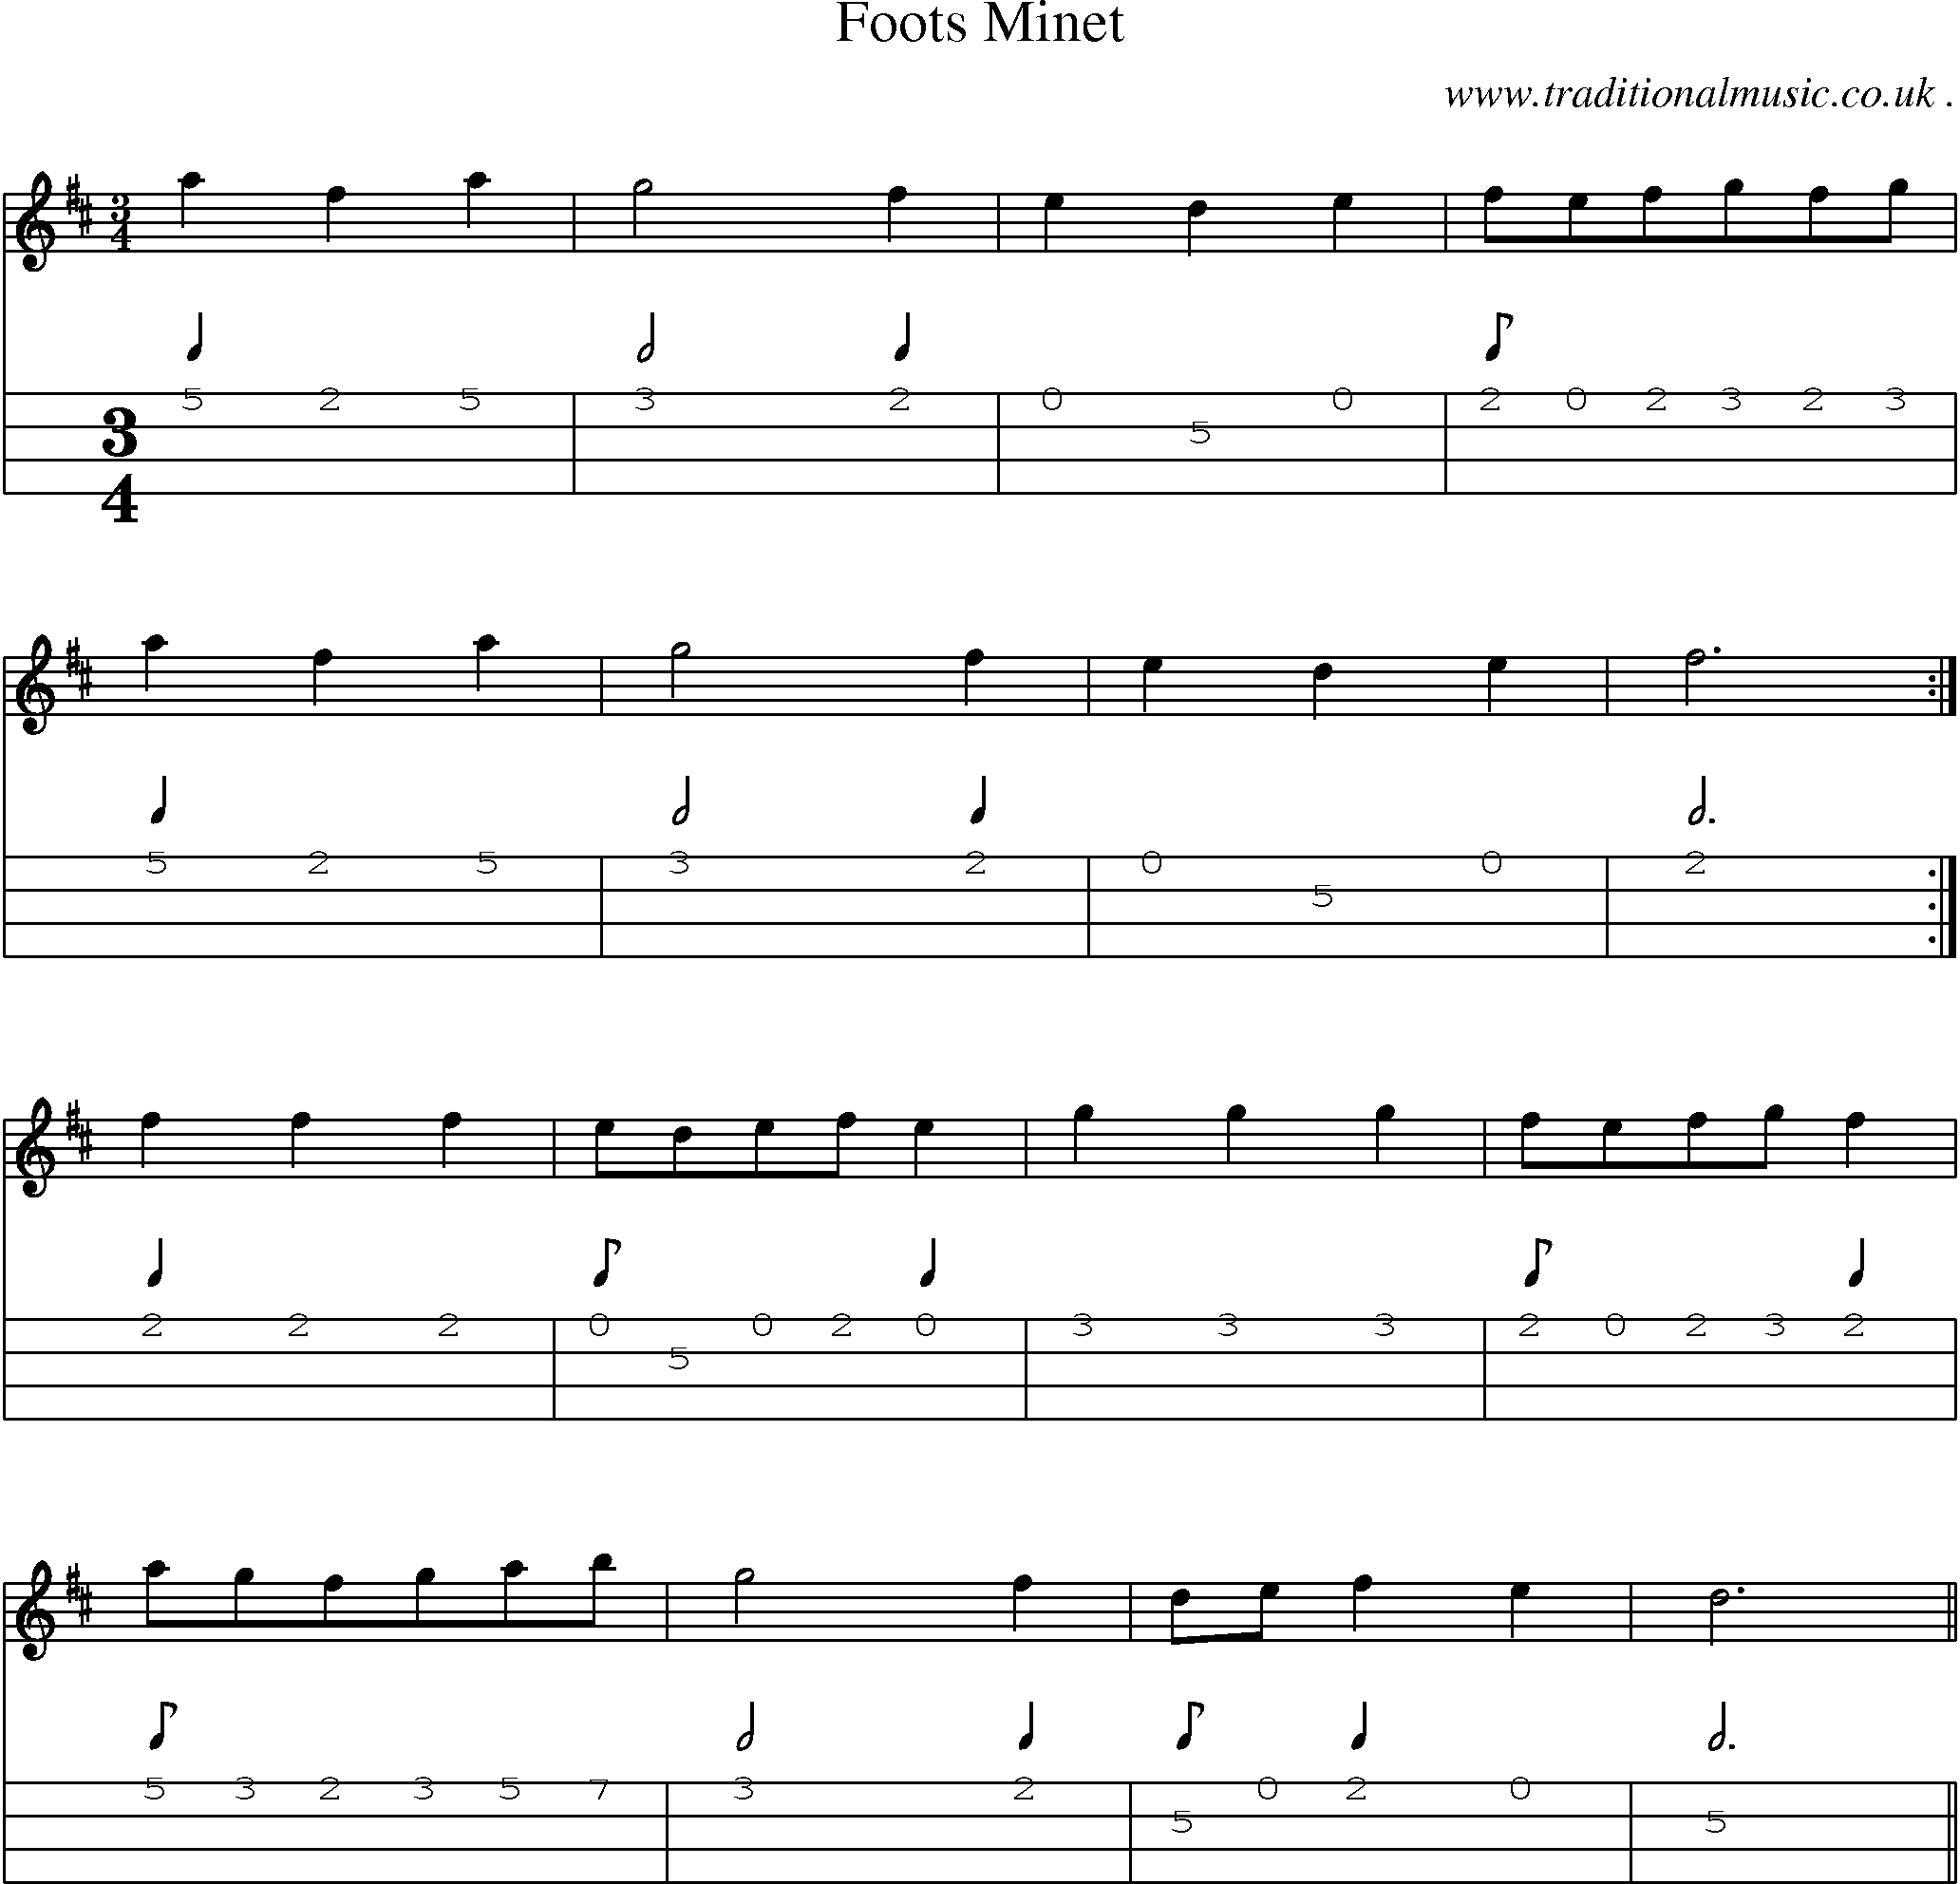 Sheet-Music and Mandolin Tabs for Foots Minet